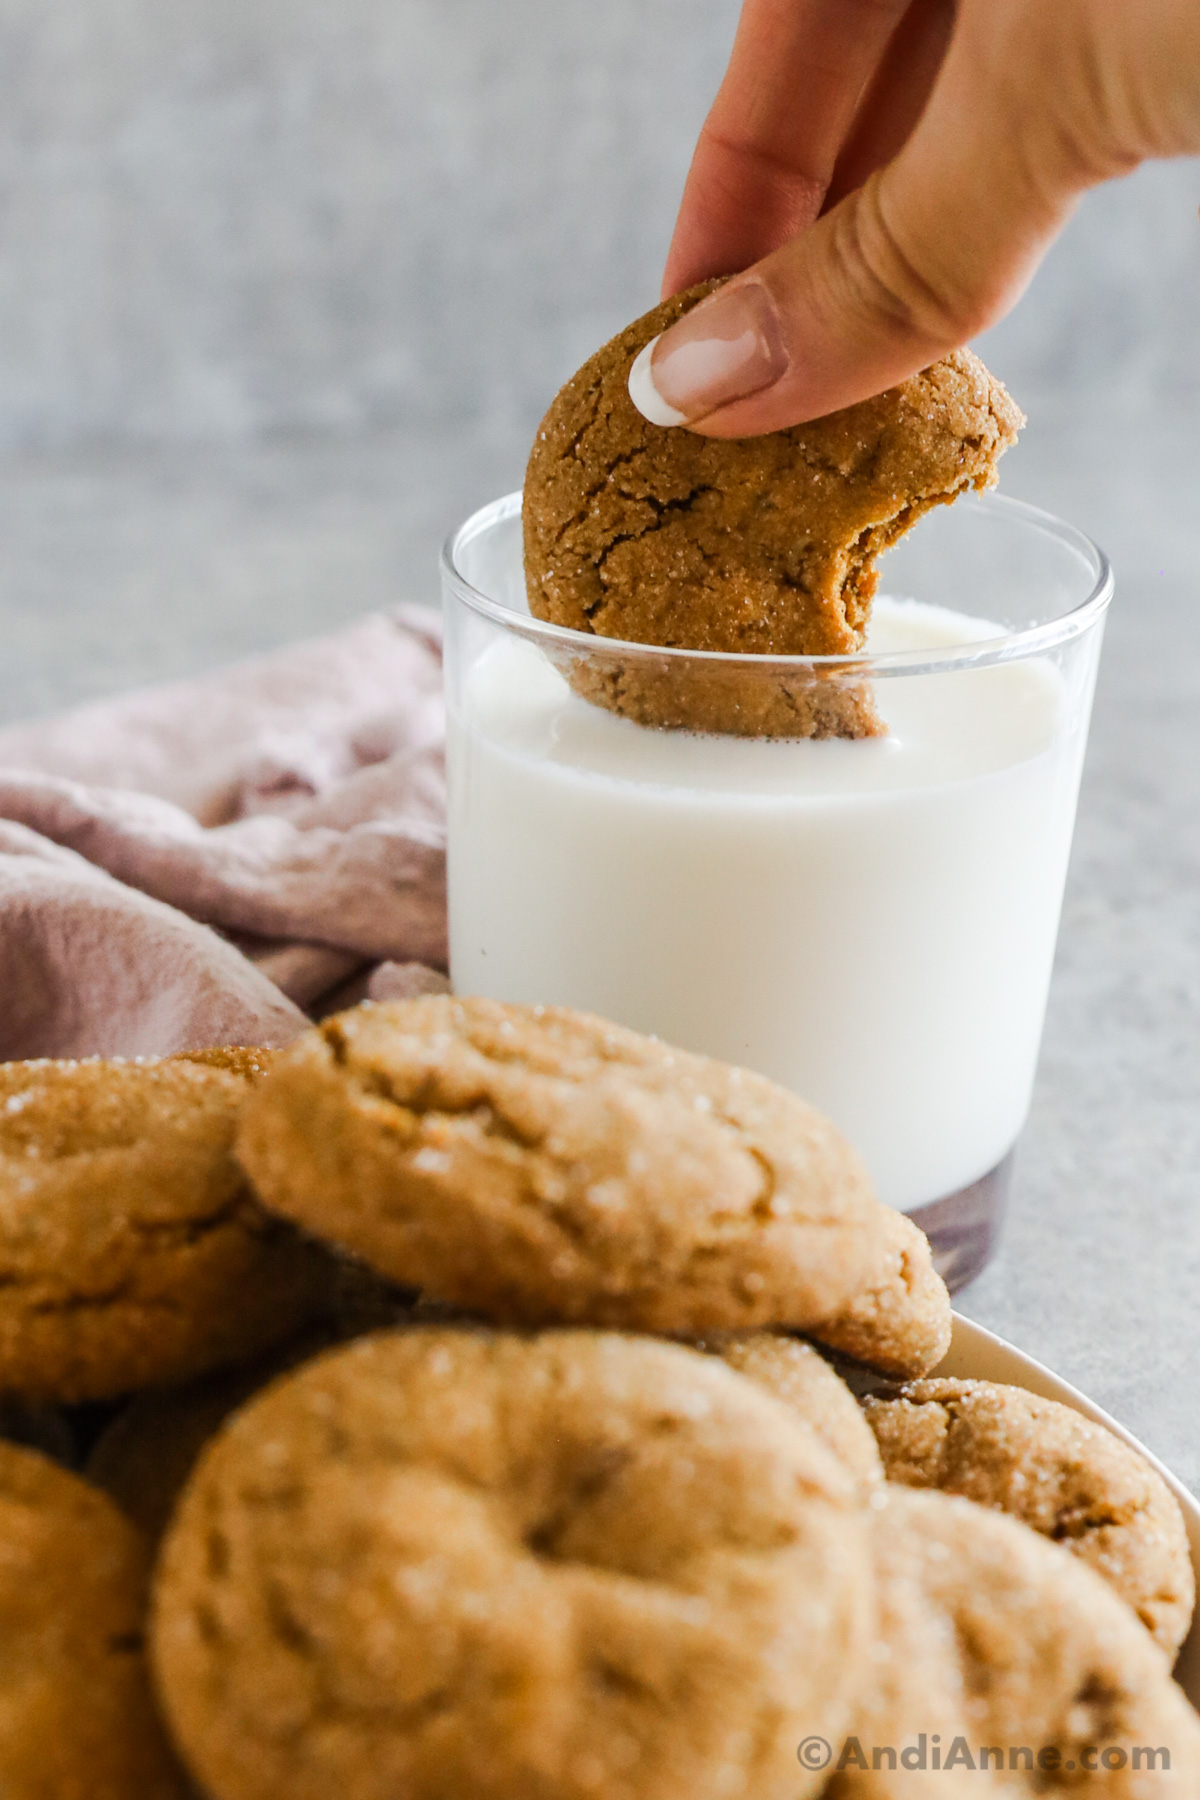 Hand dipping a cookie into a glass of milk with a stack of gingerbread cookies in front of it.